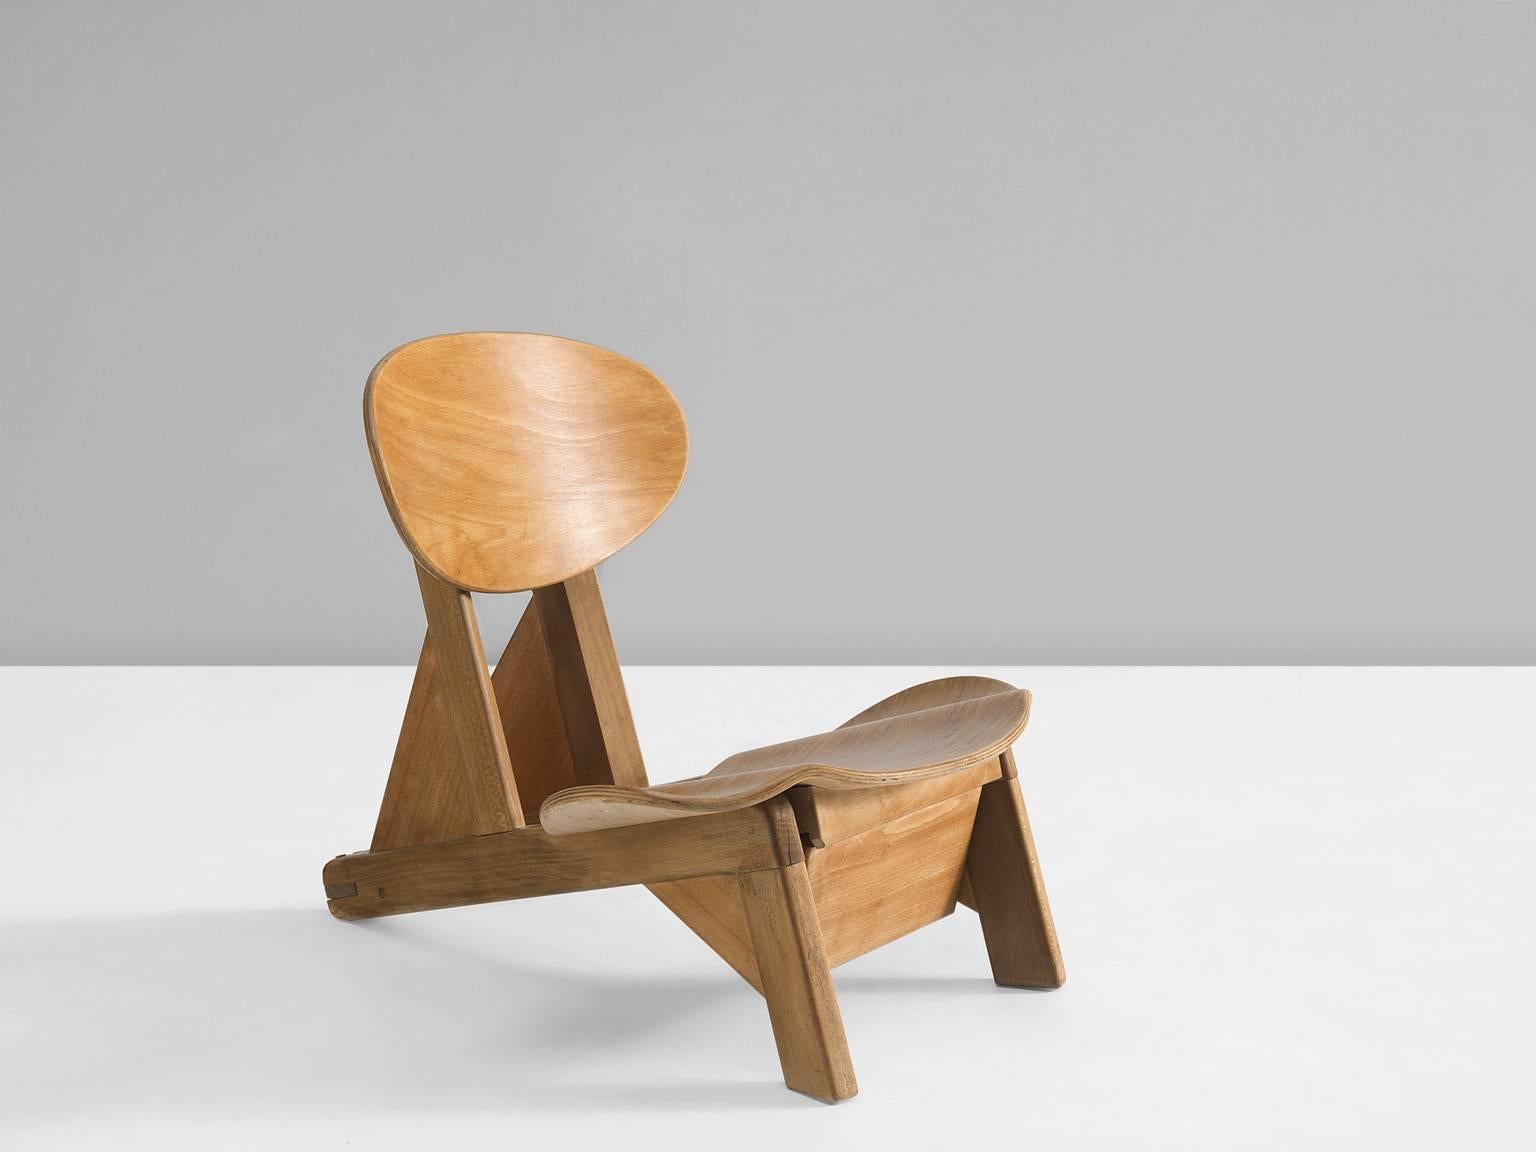 Small chair by Alain Gaubert, beech and elm, France, 1950s. 

This small and adjustable chair is by the designer Alain Gaubert. The form of this chair is truly unique as the curved seat is rare for the designs of Gaubert. This early design by